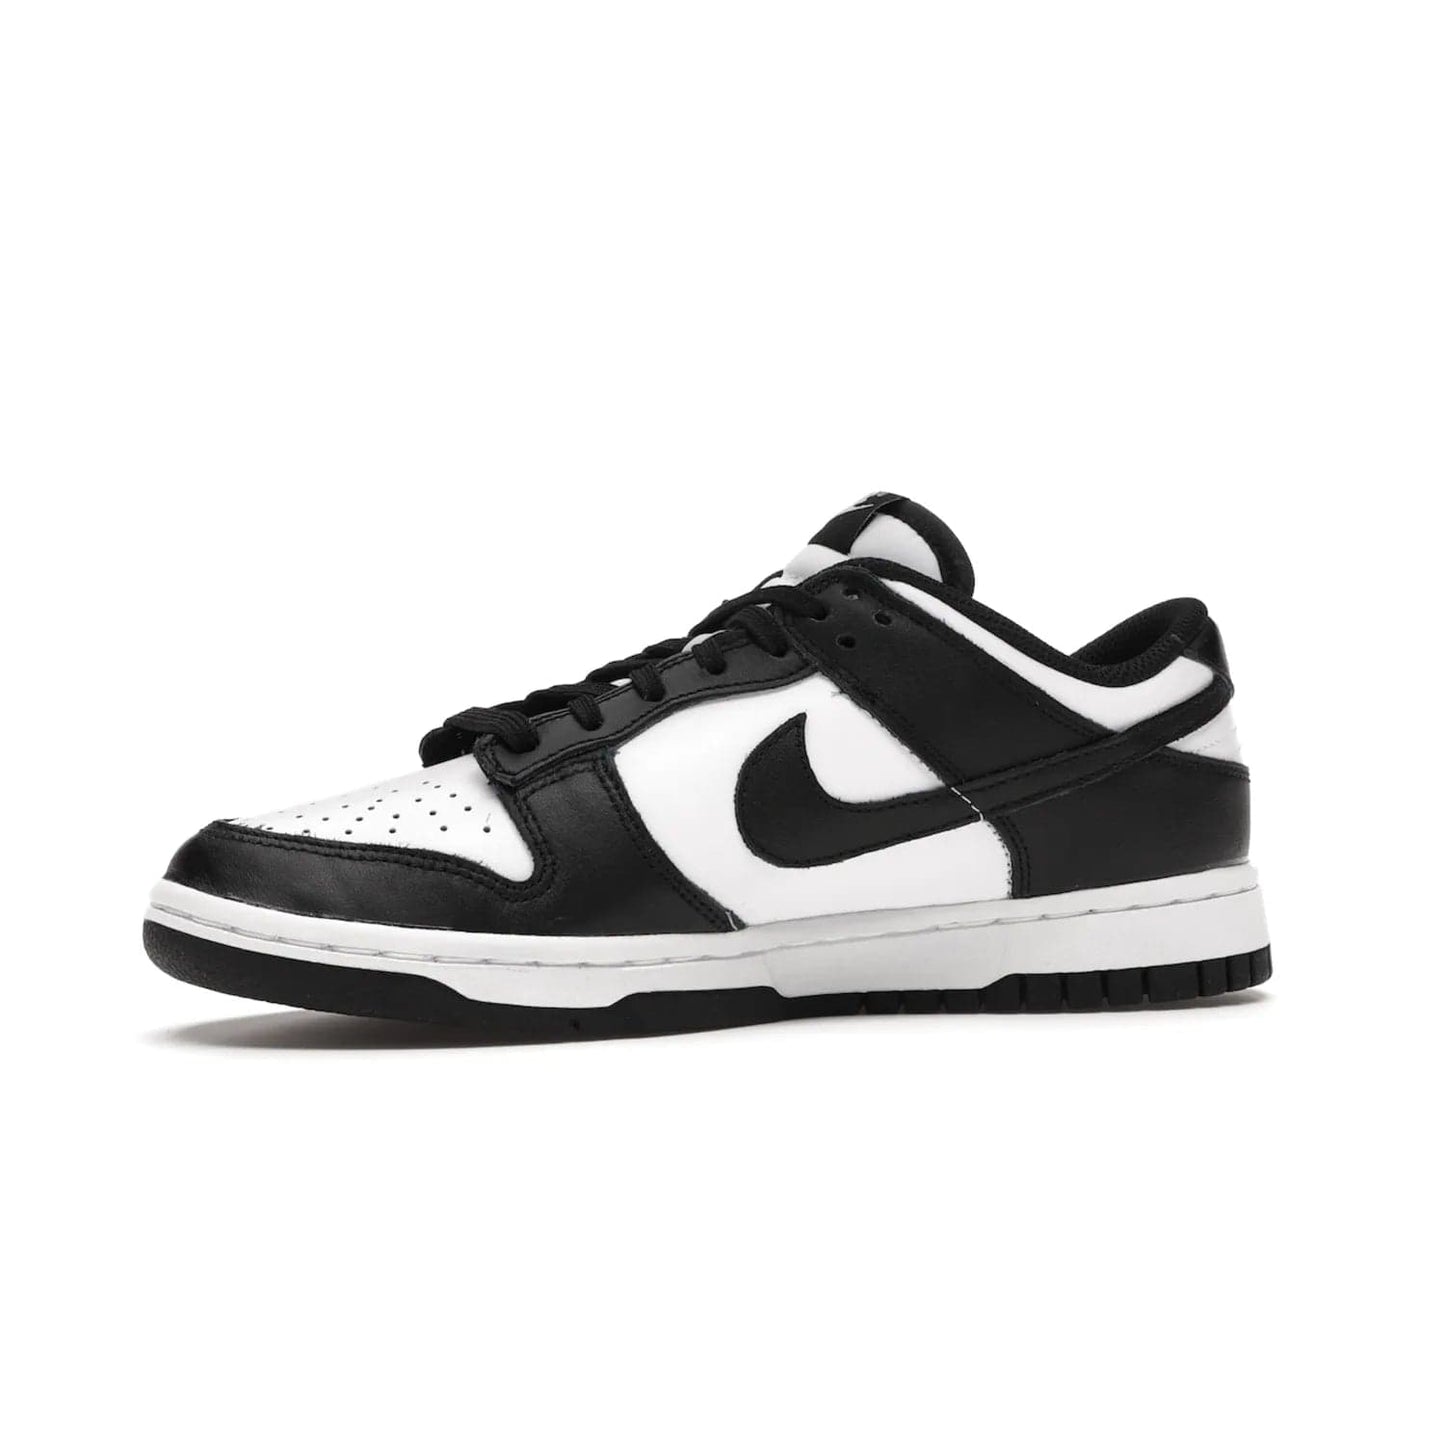 Nike Dunk Low Retro White Black Panda (2021) (Women's) - Image 17 - Only at www.BallersClubKickz.com - Say hello to the new Nike Dunk Low Retro White Black Panda (2021) (Women's)! White & black leather upper with Nike Swoosh logo. Get your pair for $100 in March 2021! Shop now!